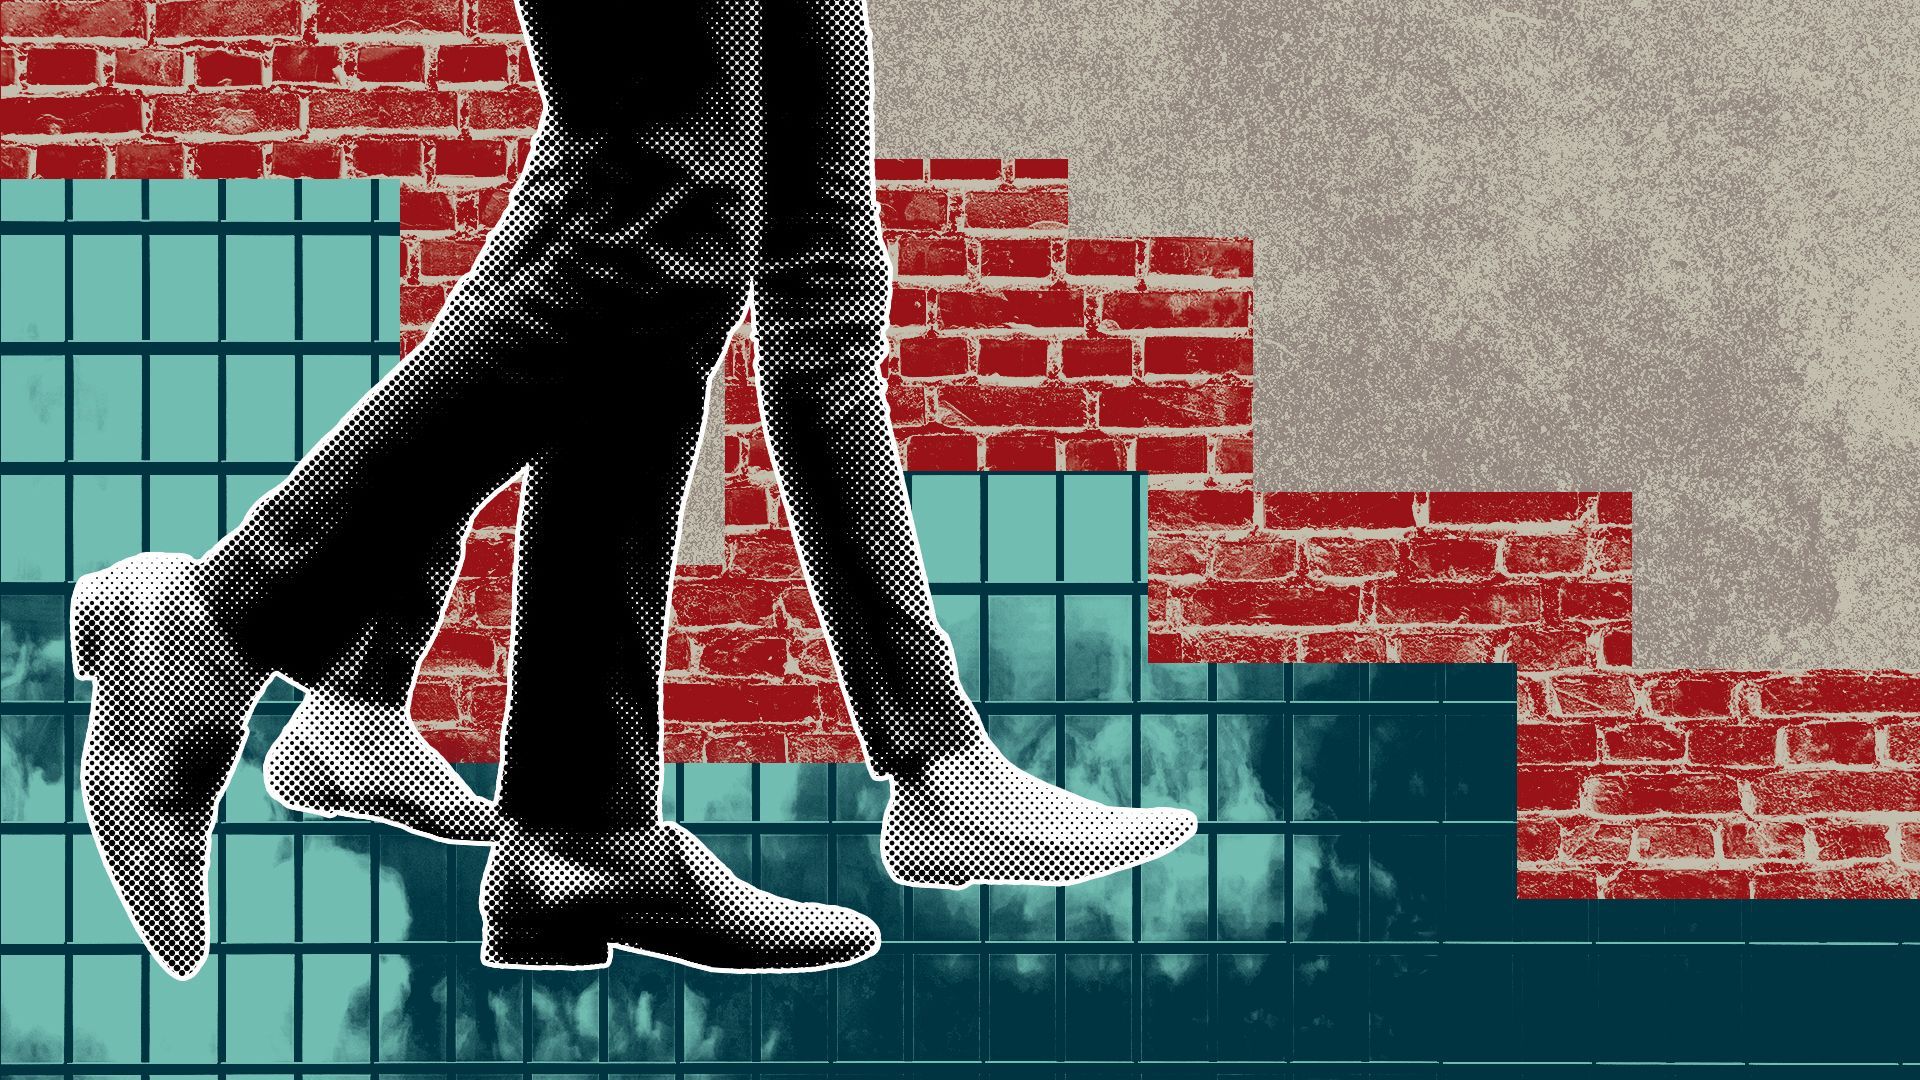 Illustration of a collage featuring concrete, brick, and glass textures, city skyline shapes, and a pair of people's legs walking.